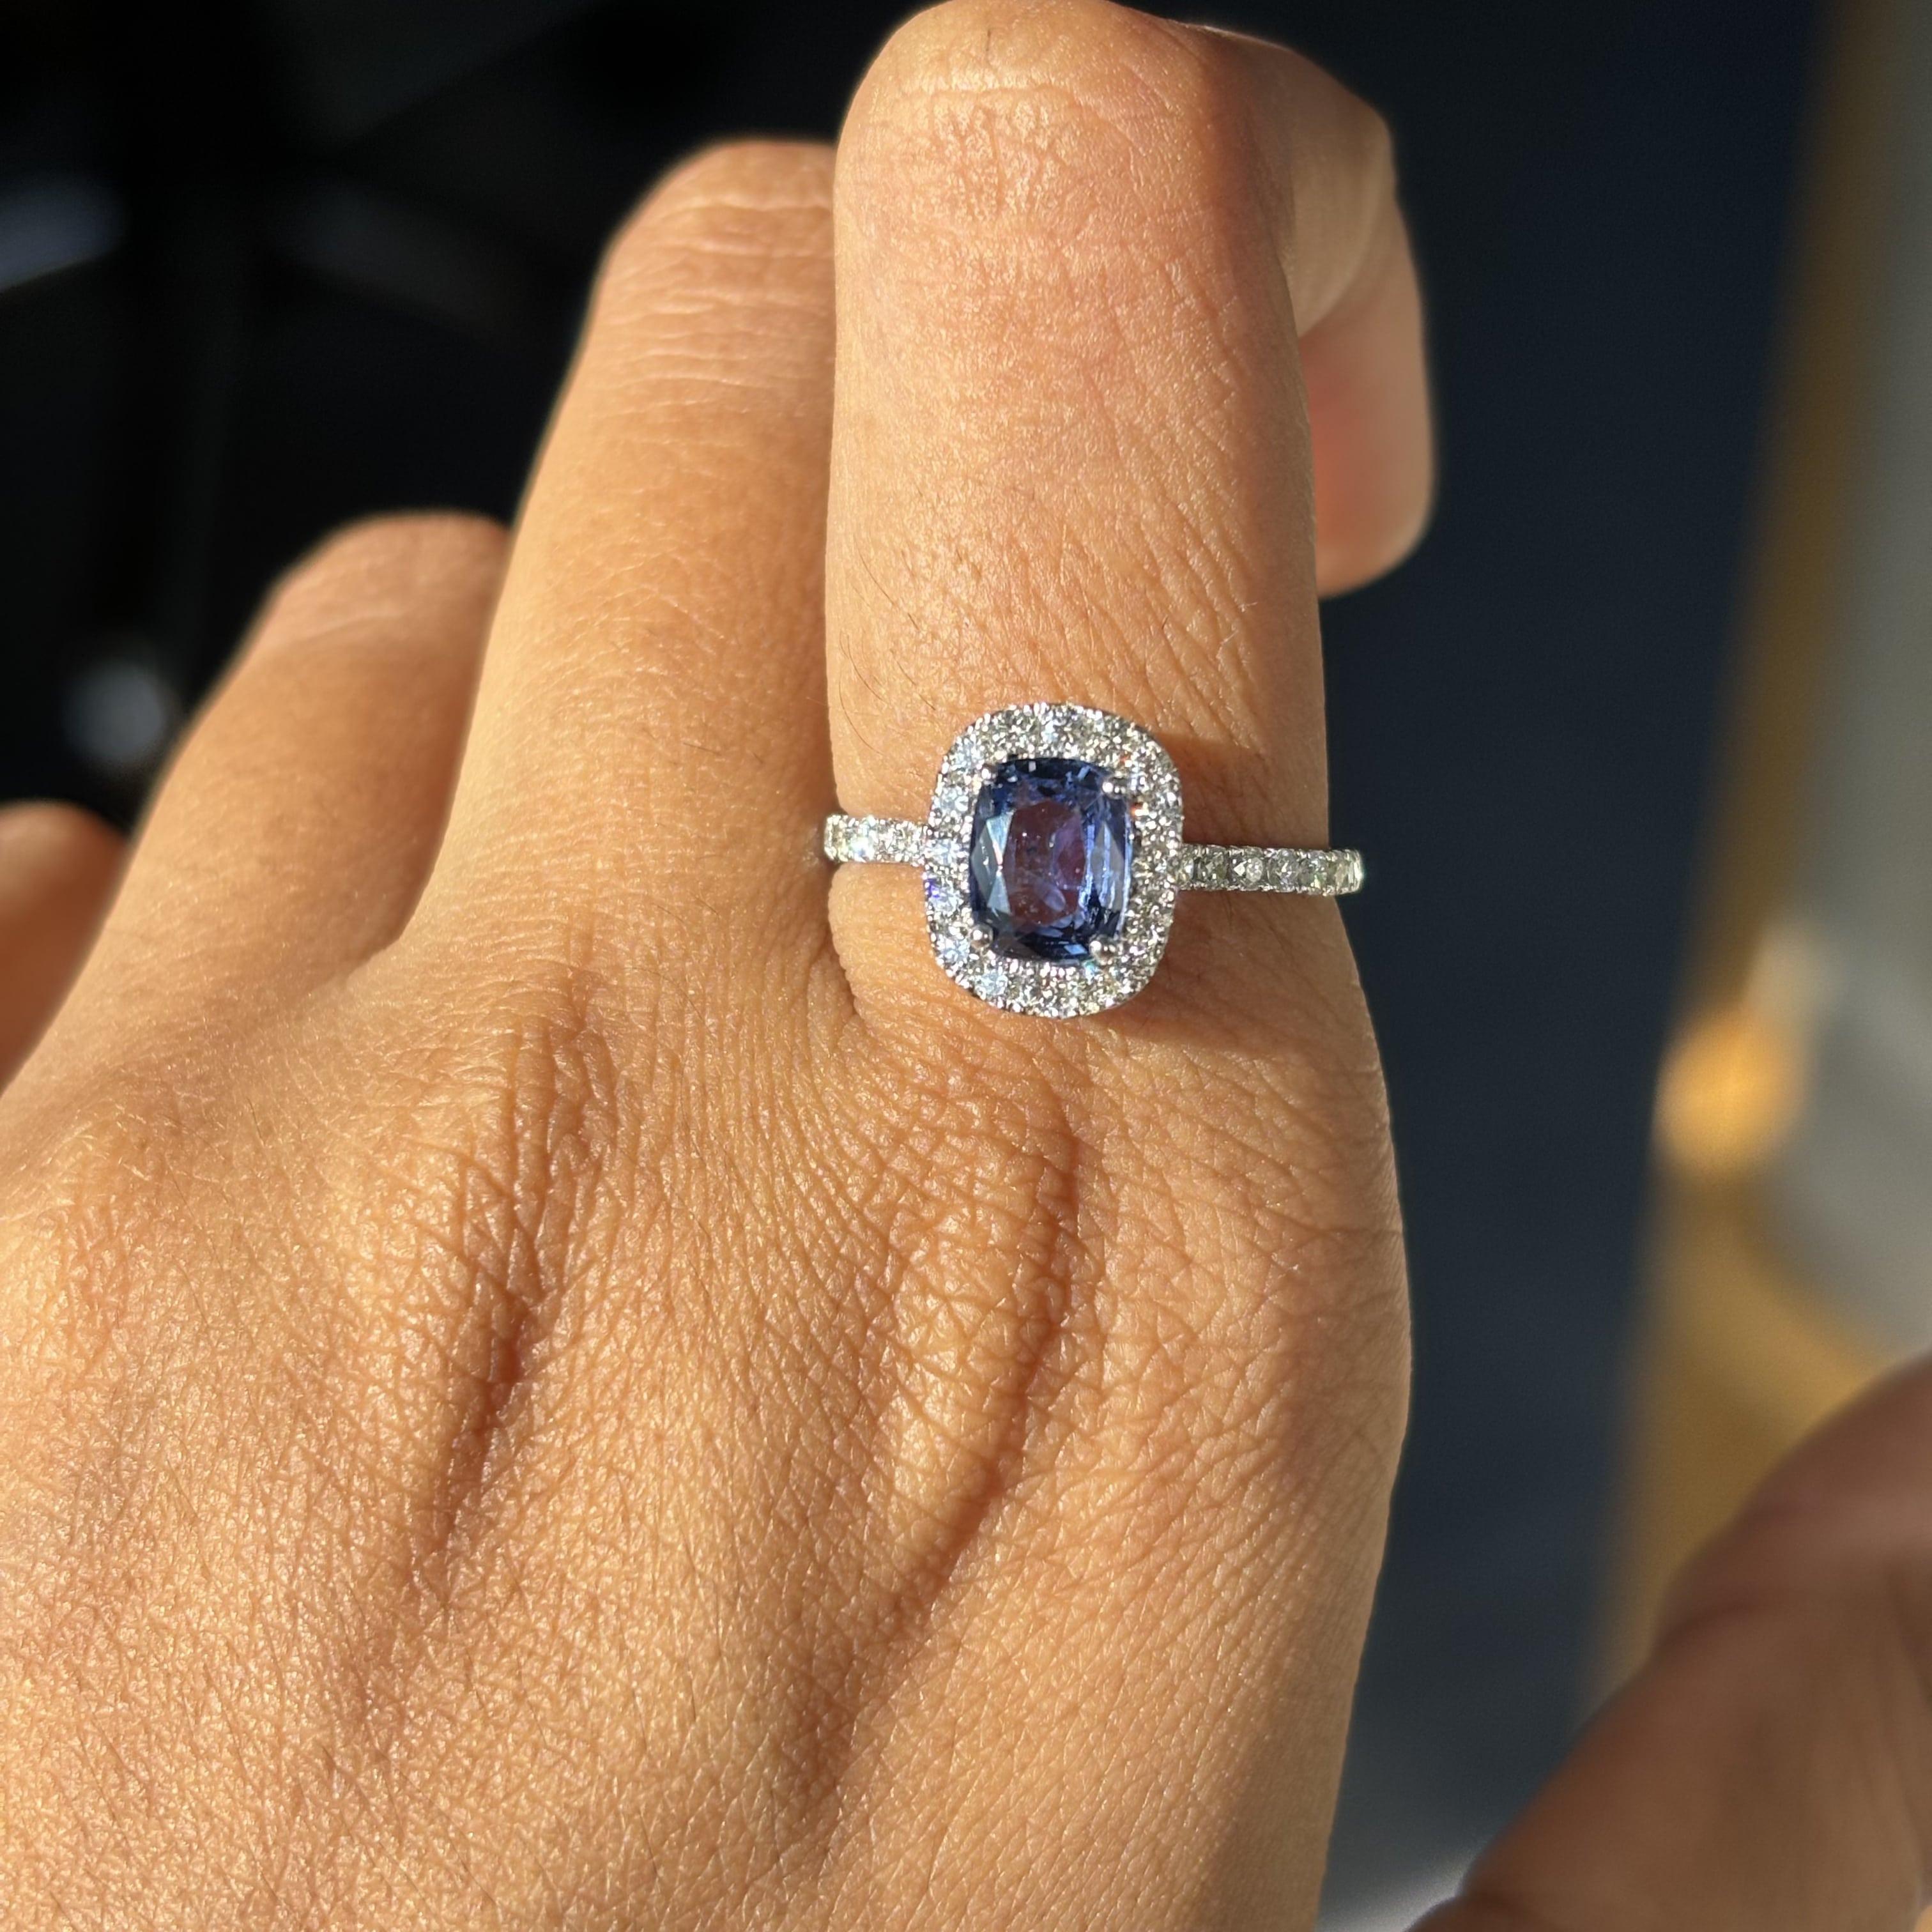 1.21 Carat Ceylon Blue Sapphire Ring with Halo Diamonds in 14K White Gold For Sale 2